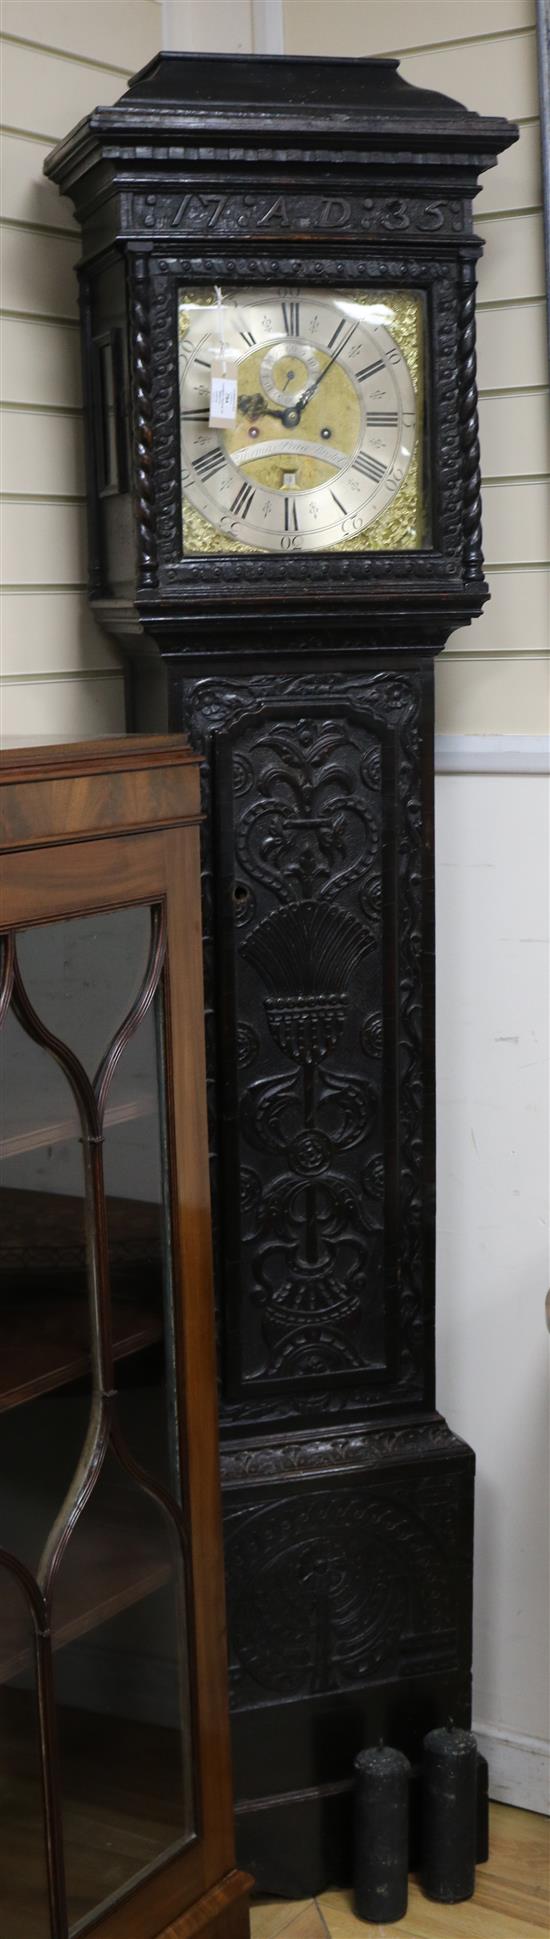 Thomas Pierce of Bristol. A George III eight day longcase clock, in a carved oak case bearing the date 1735